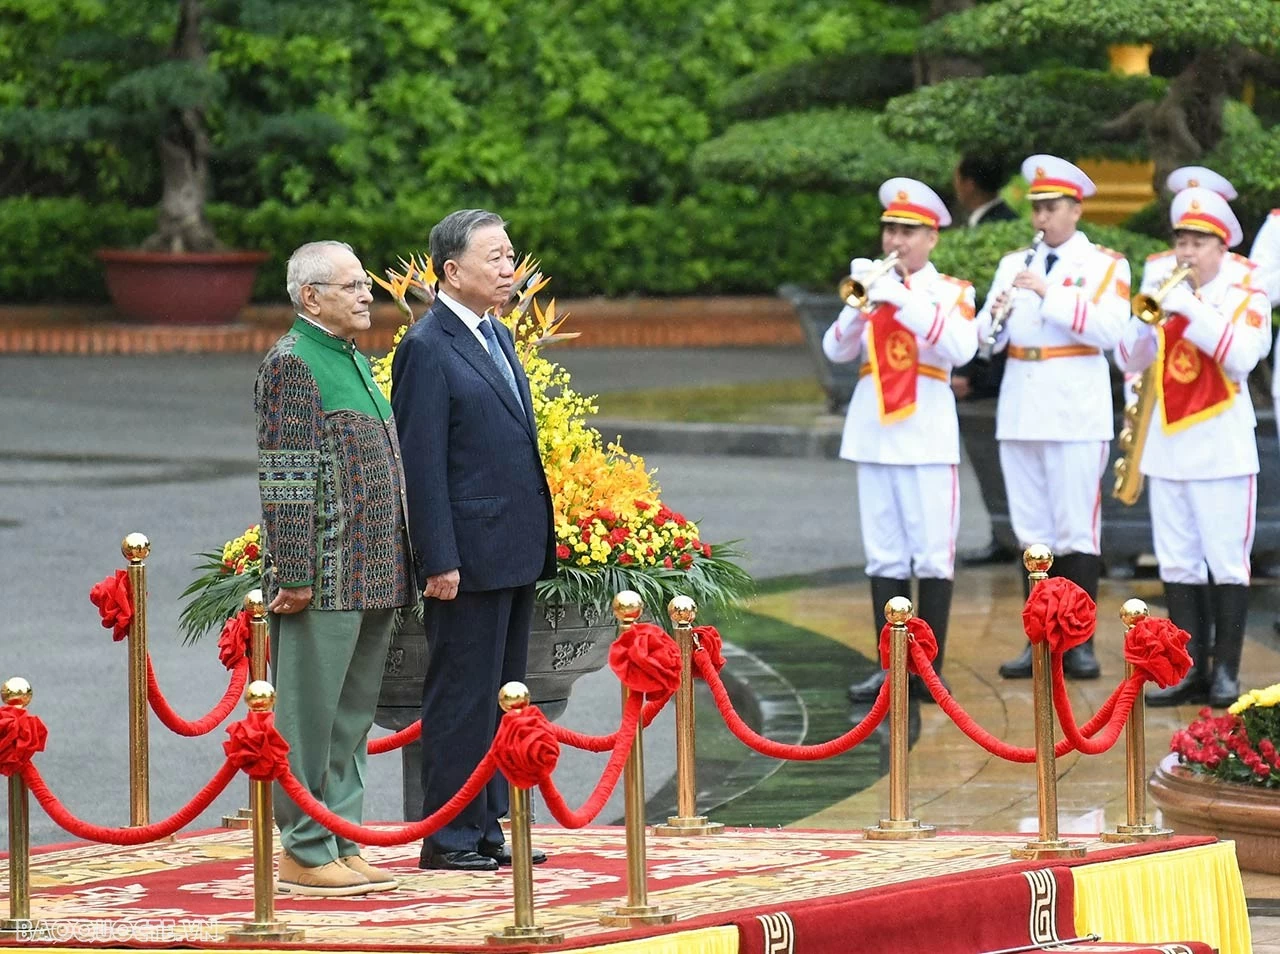 Vietnam, Timor-Leste Presidents hold talks to promote all-round cooperation